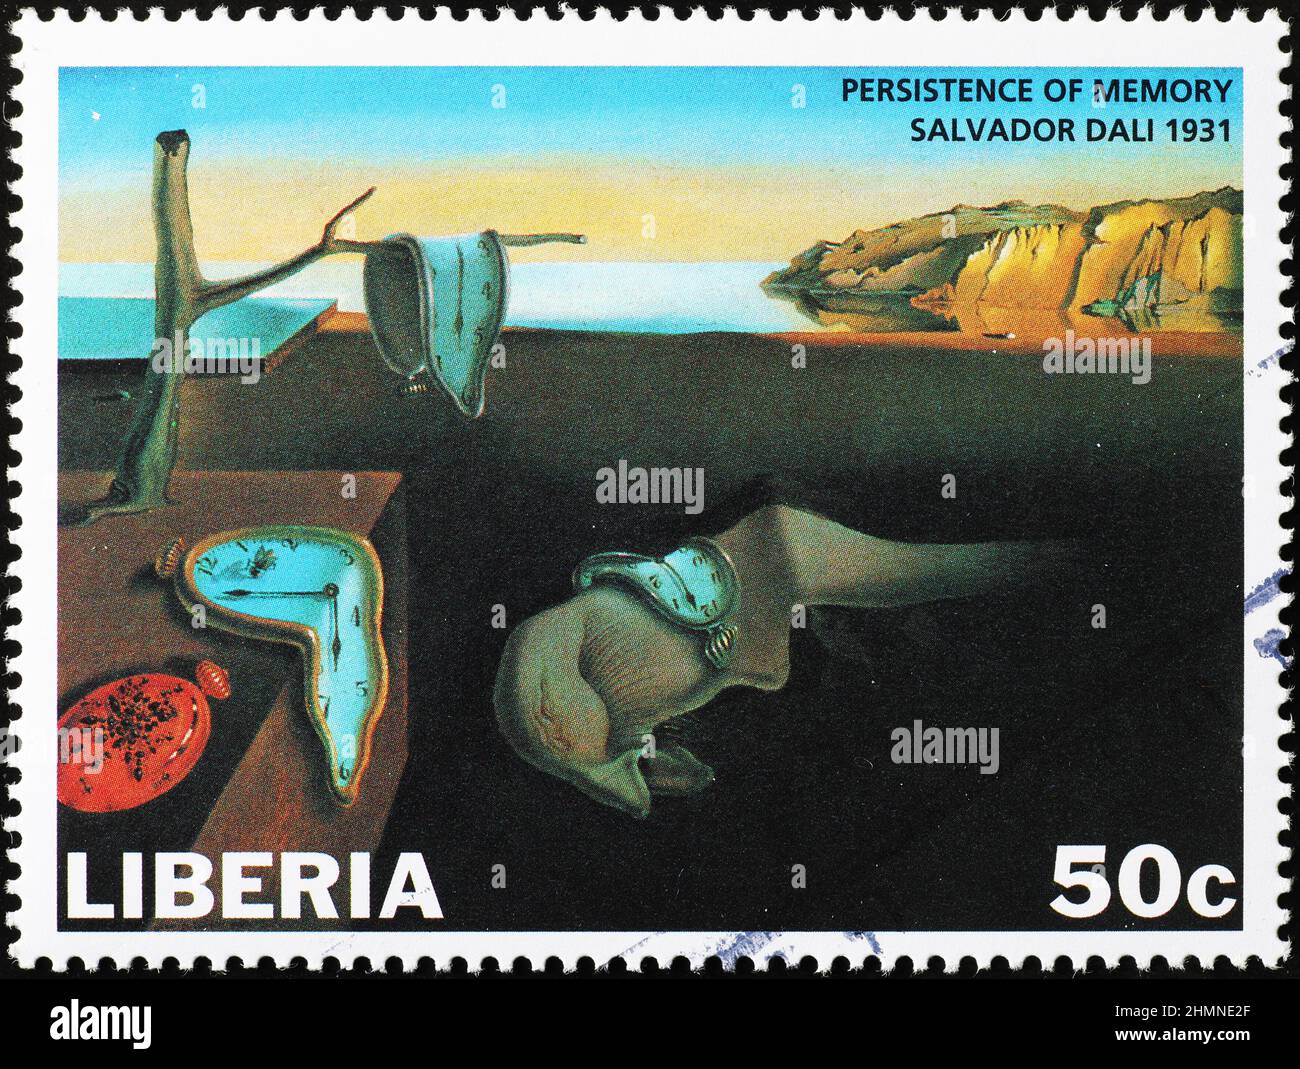 The persistence of memory by Salvador Dalì on african stamp Stock Photo